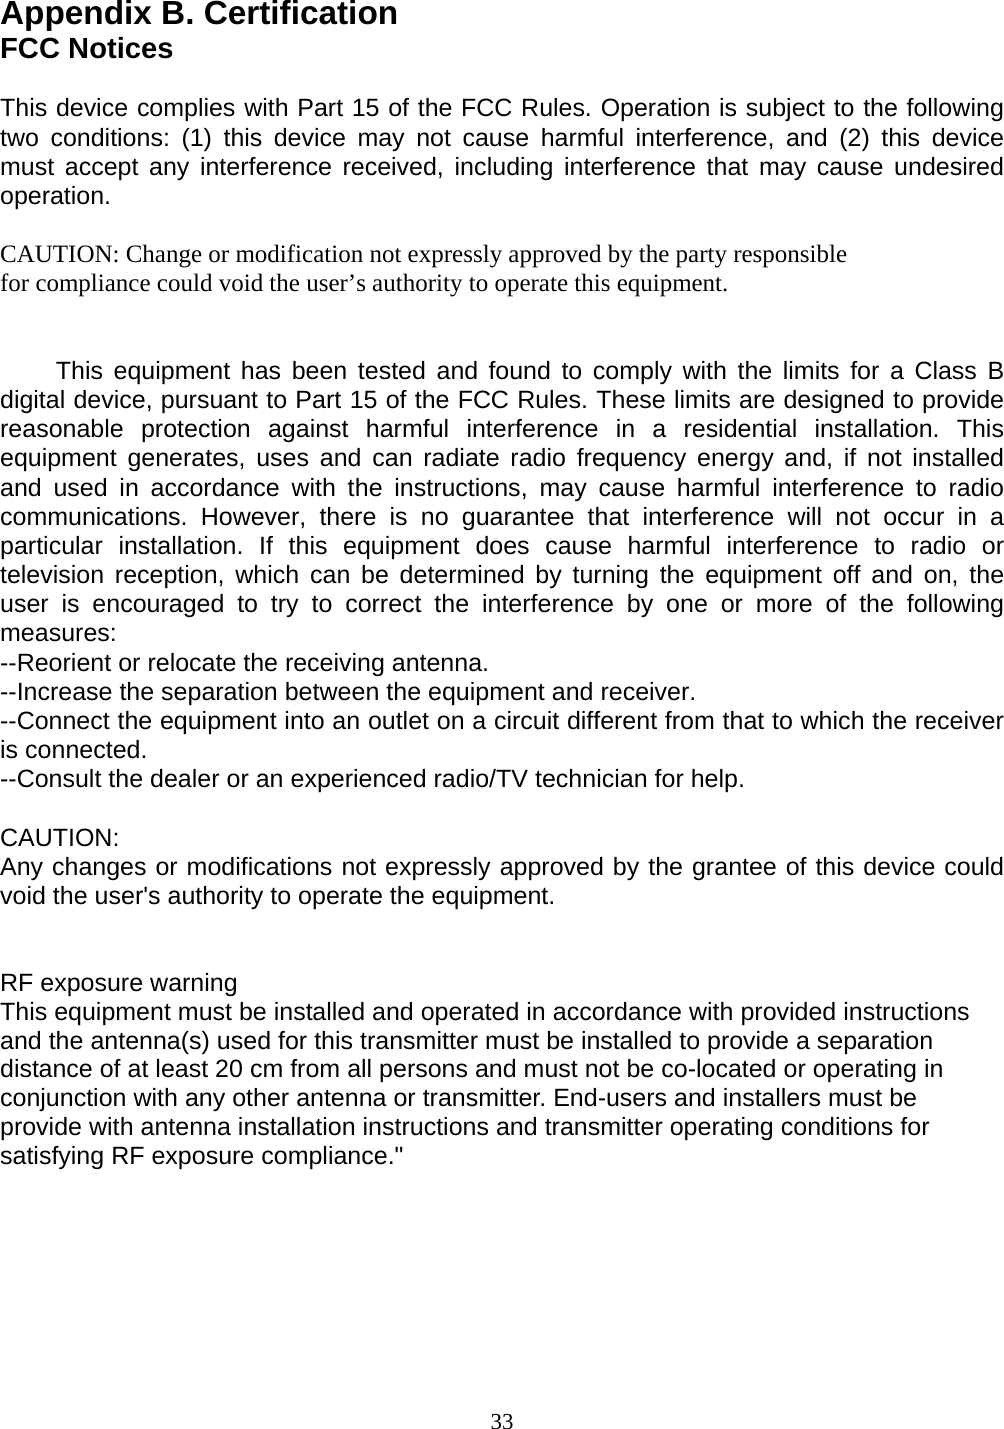 Appendix B. Certification FCC Notices  This device complies with Part 15 of the FCC Rules. Operation is subject to the following two conditions: (1) this device may not cause harmful interference, and (2) this device must accept any interference received, including interference that may cause undesired operation.  CAUTION: Change or modification not expressly approved by the party responsible for compliance could void the user’s authority to operate this equipment.           This equipment has  been  tested and found to comply with the limits for a Class B digital device, pursuant to Part 15 of the FCC Rules. These limits are designed to provide reasonable protection against harmful interference in a residential installation. This equipment generates, uses and can radiate radio frequency energy and, if not installed and used in accordance with the instructions, may cause harmful interference to radio communications. However, there is no guarantee that interference will not occur in a particular installation. If this equipment does cause harmful interference to radio or television reception, which can be determined by turning the equipment off and on, the user is encouraged to try to correct the interference by one or more of the following measures: --Reorient or relocate the receiving antenna. --Increase the separation between the equipment and receiver. --Connect the equipment into an outlet on a circuit different from that to which the receiver is connected. --Consult the dealer or an experienced radio/TV technician for help.  CAUTION: Any changes or modifications not expressly approved by the grantee of this device could void the user&apos;s authority to operate the equipment.    RF exposure warning   This equipment must be installed and operated in accordance with provided instructions and the antenna(s) used for this transmitter must be installed to provide a separation distance of at least 20 cm from all persons and must not be co-located or operating in conjunction with any other antenna or transmitter. End-users and installers must be provide with antenna installation instructions and transmitter operating conditions for satisfying RF exposure compliance.&quot;         33 